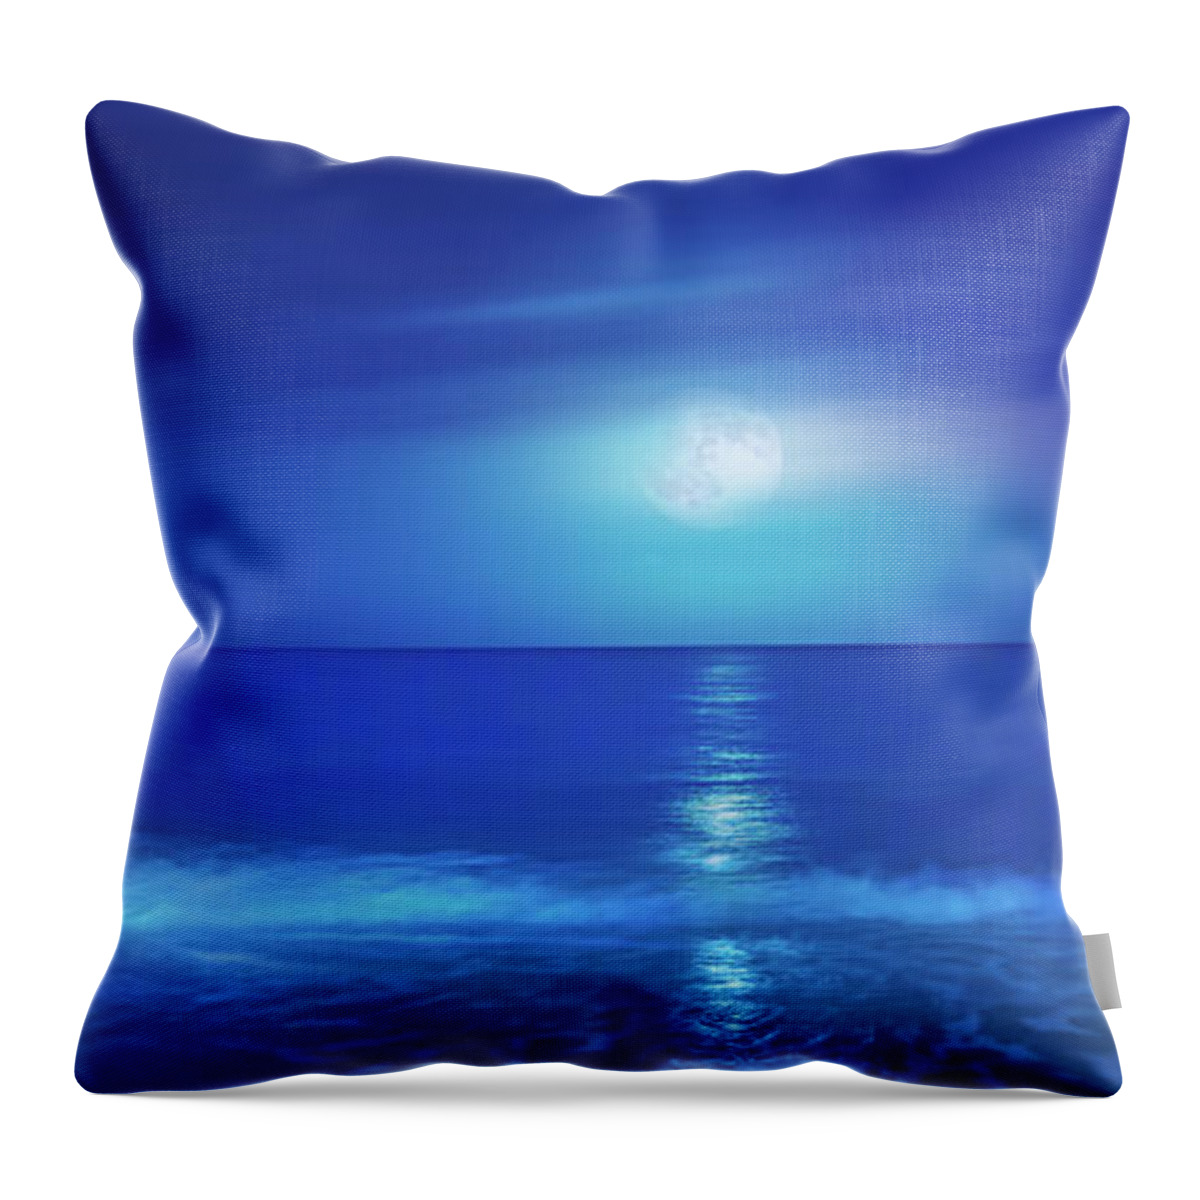 Moon Throw Pillow featuring the photograph Tropical Moonrise by Mark Andrew Thomas